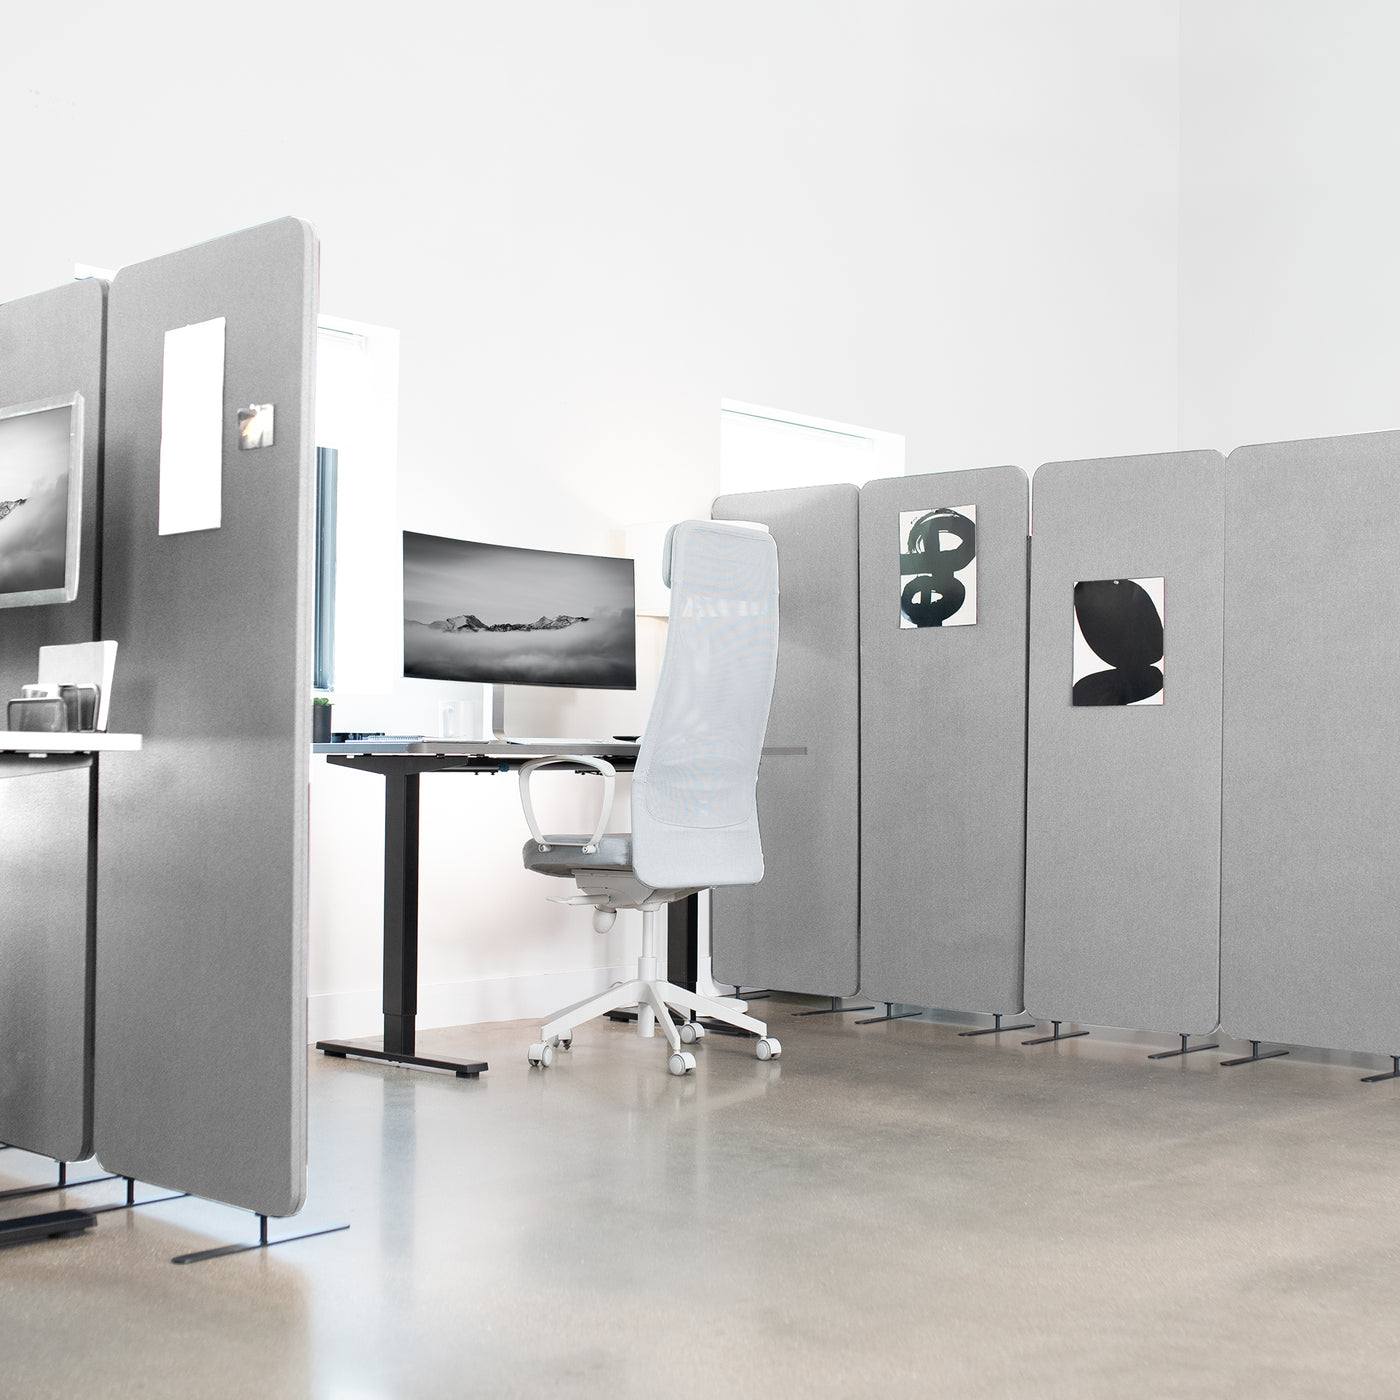 Gray Freestanding Room Divider provides a convenient partition and workspace privacy.